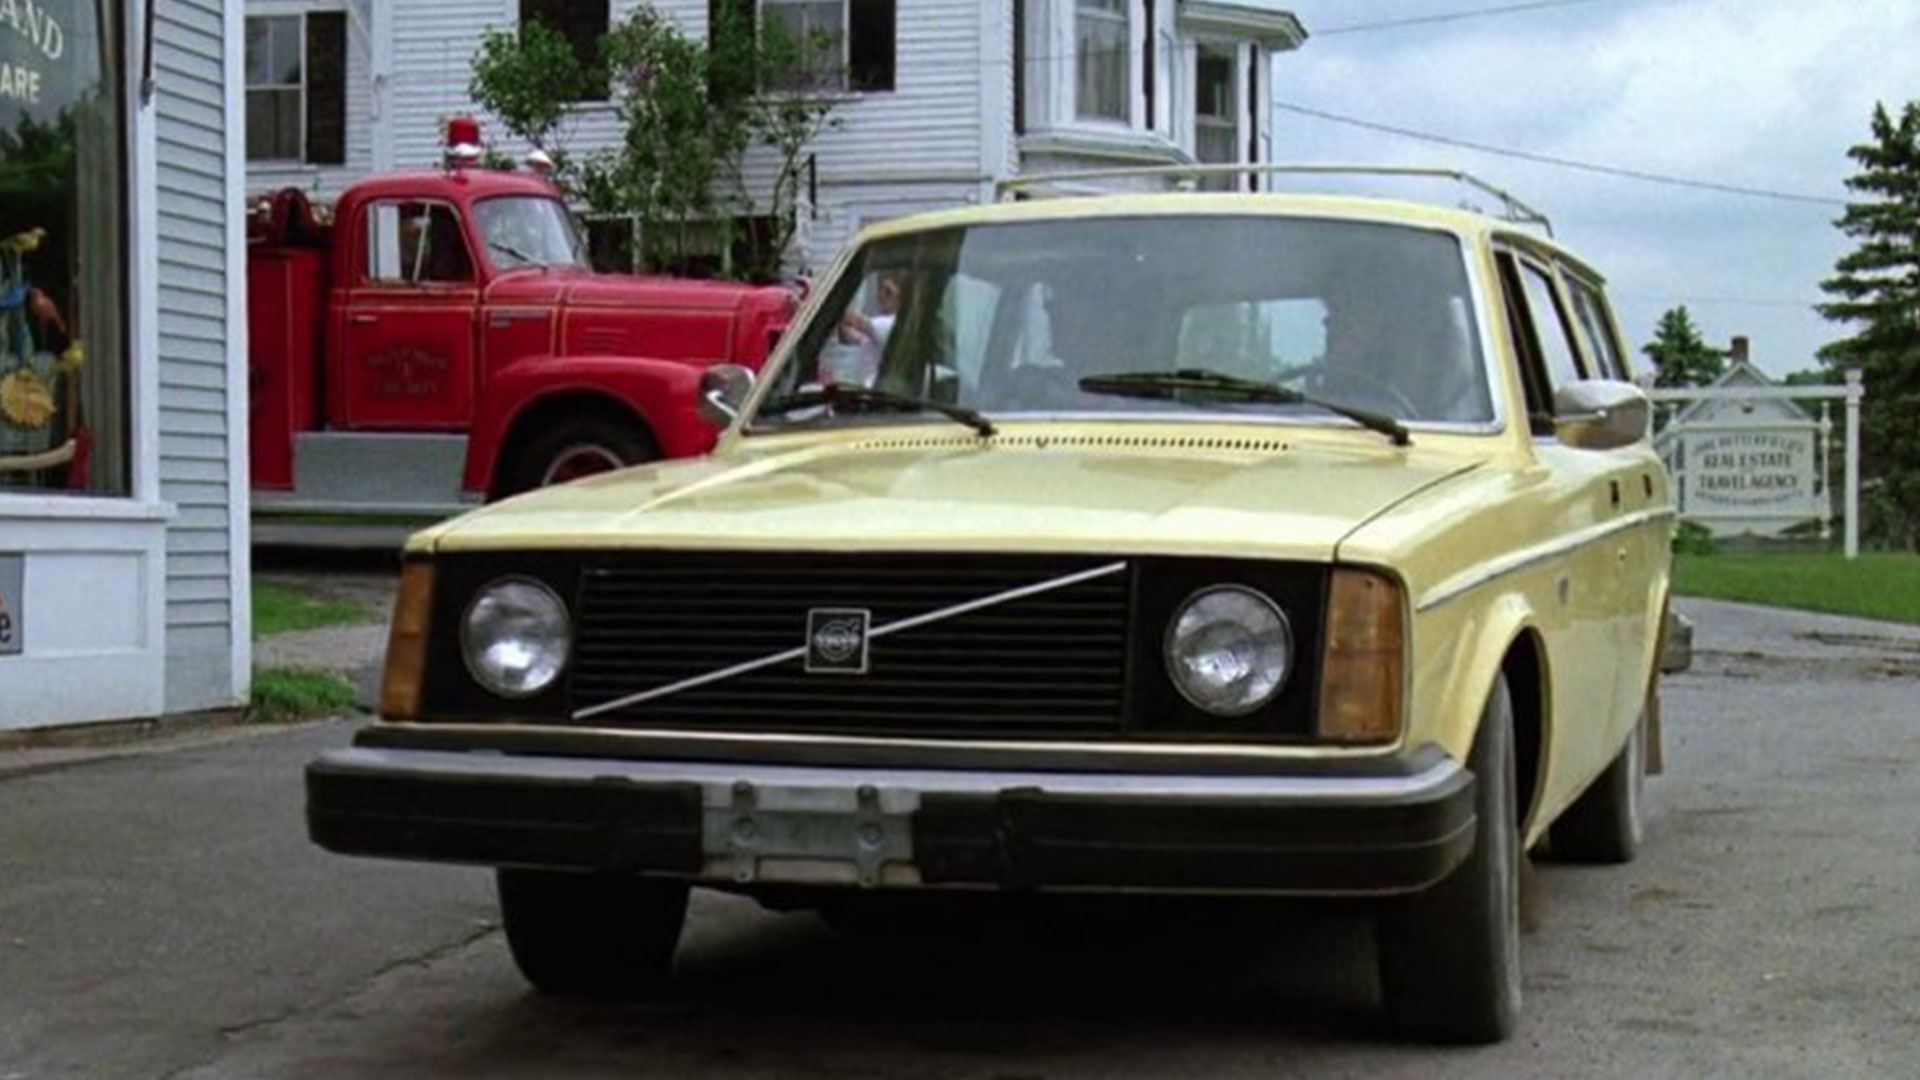 here are 13 of the best movie cars from scary (and scary-ish) classics